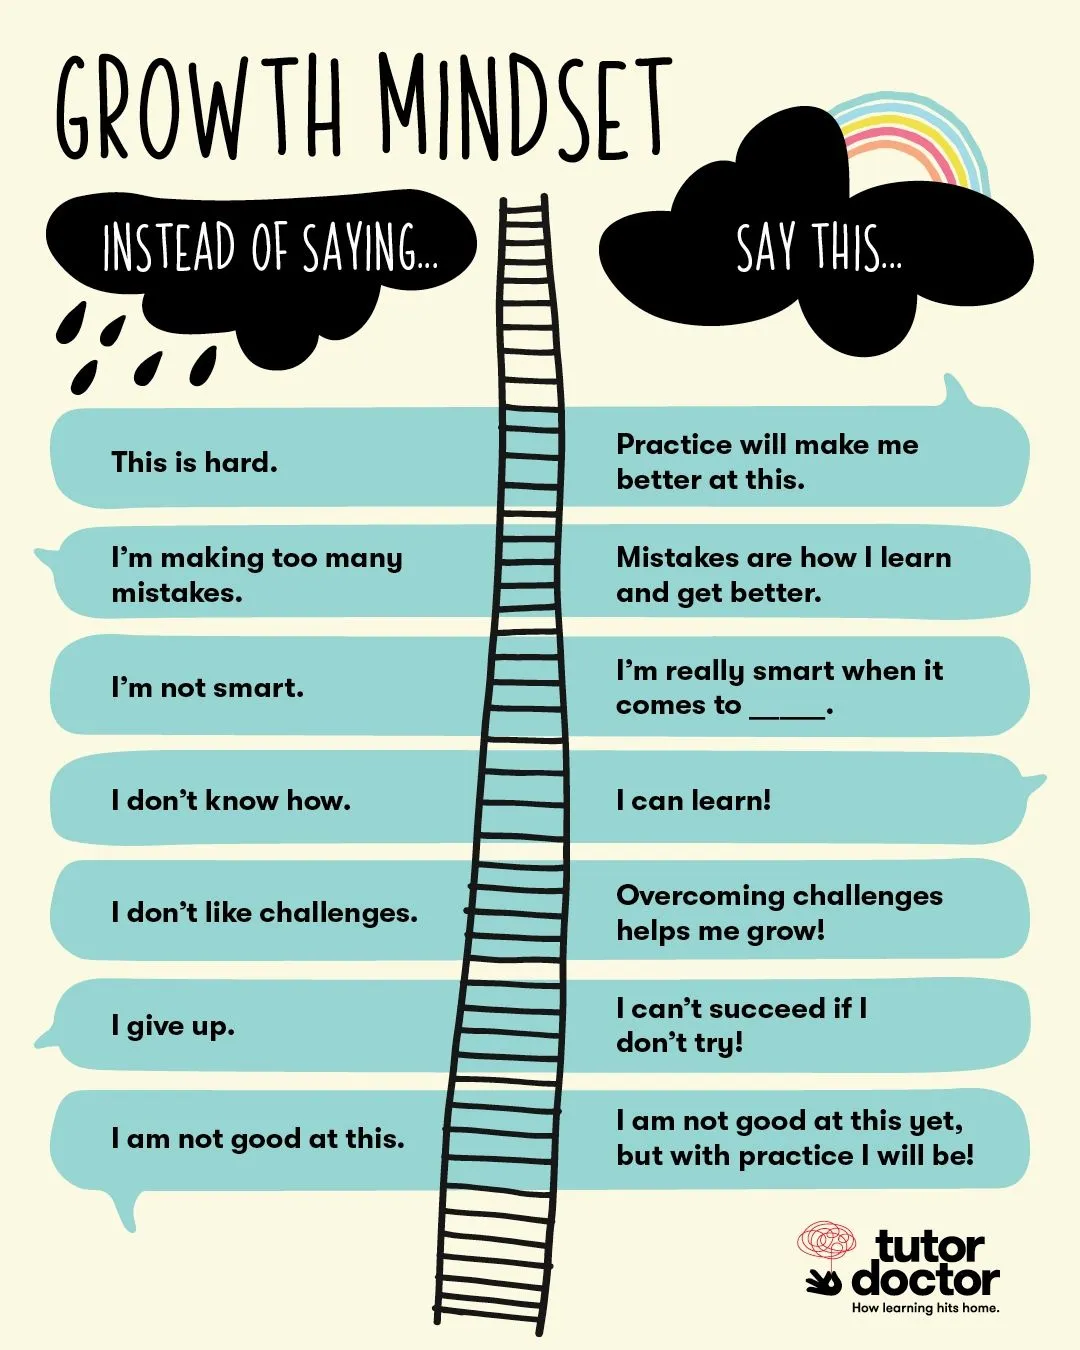 How to Boost Your Growth Mindset